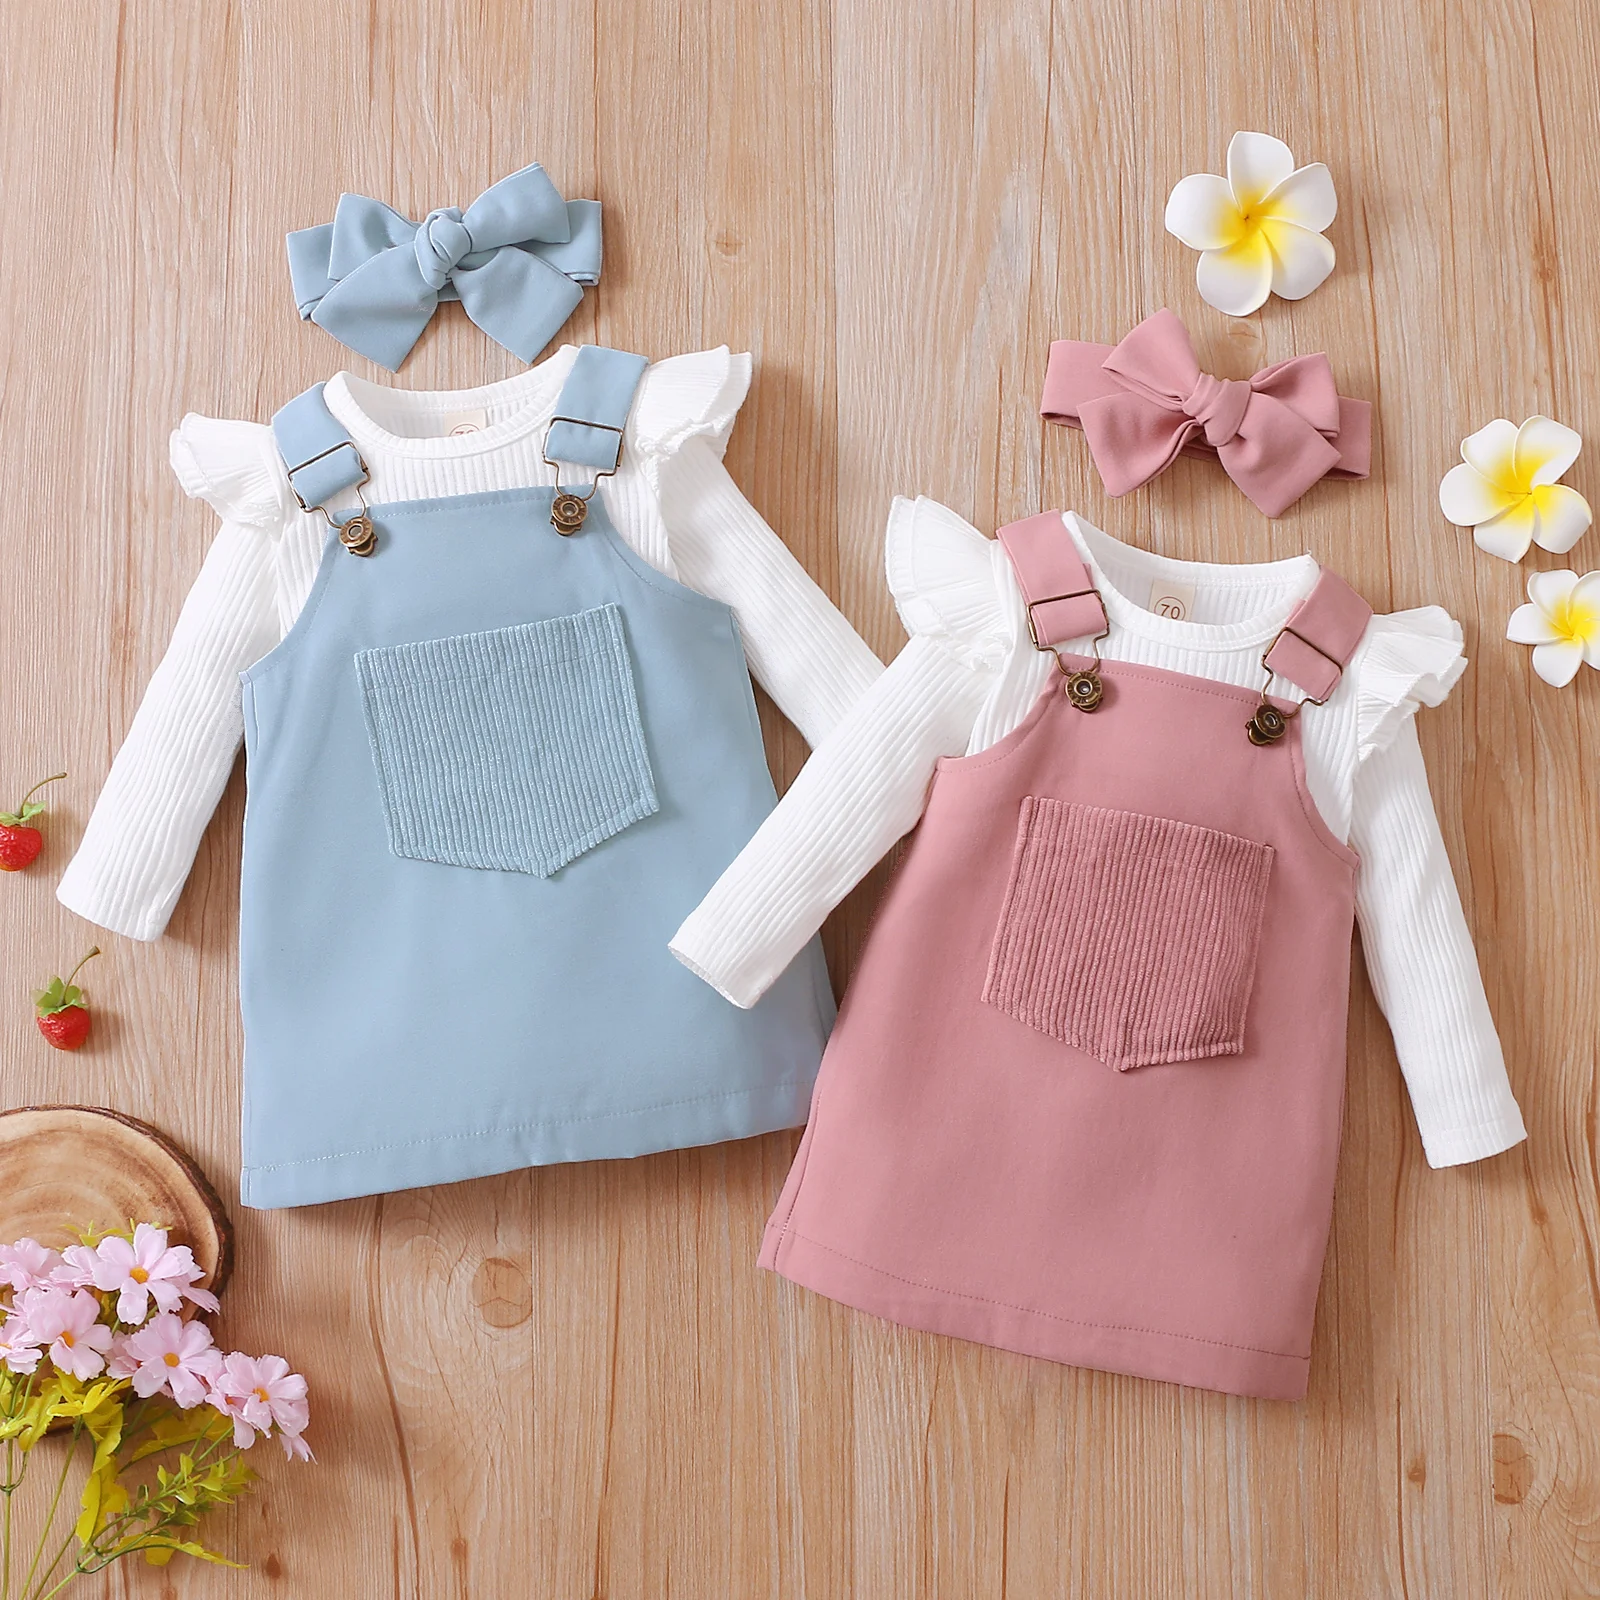 3Pcs Infant Baby Girls Clothes Set Solid Long Sleeve Knitted Romper + Front Pocket Suspender Skirt + Headwear Infant Outfits Baby Clothing Set cheap